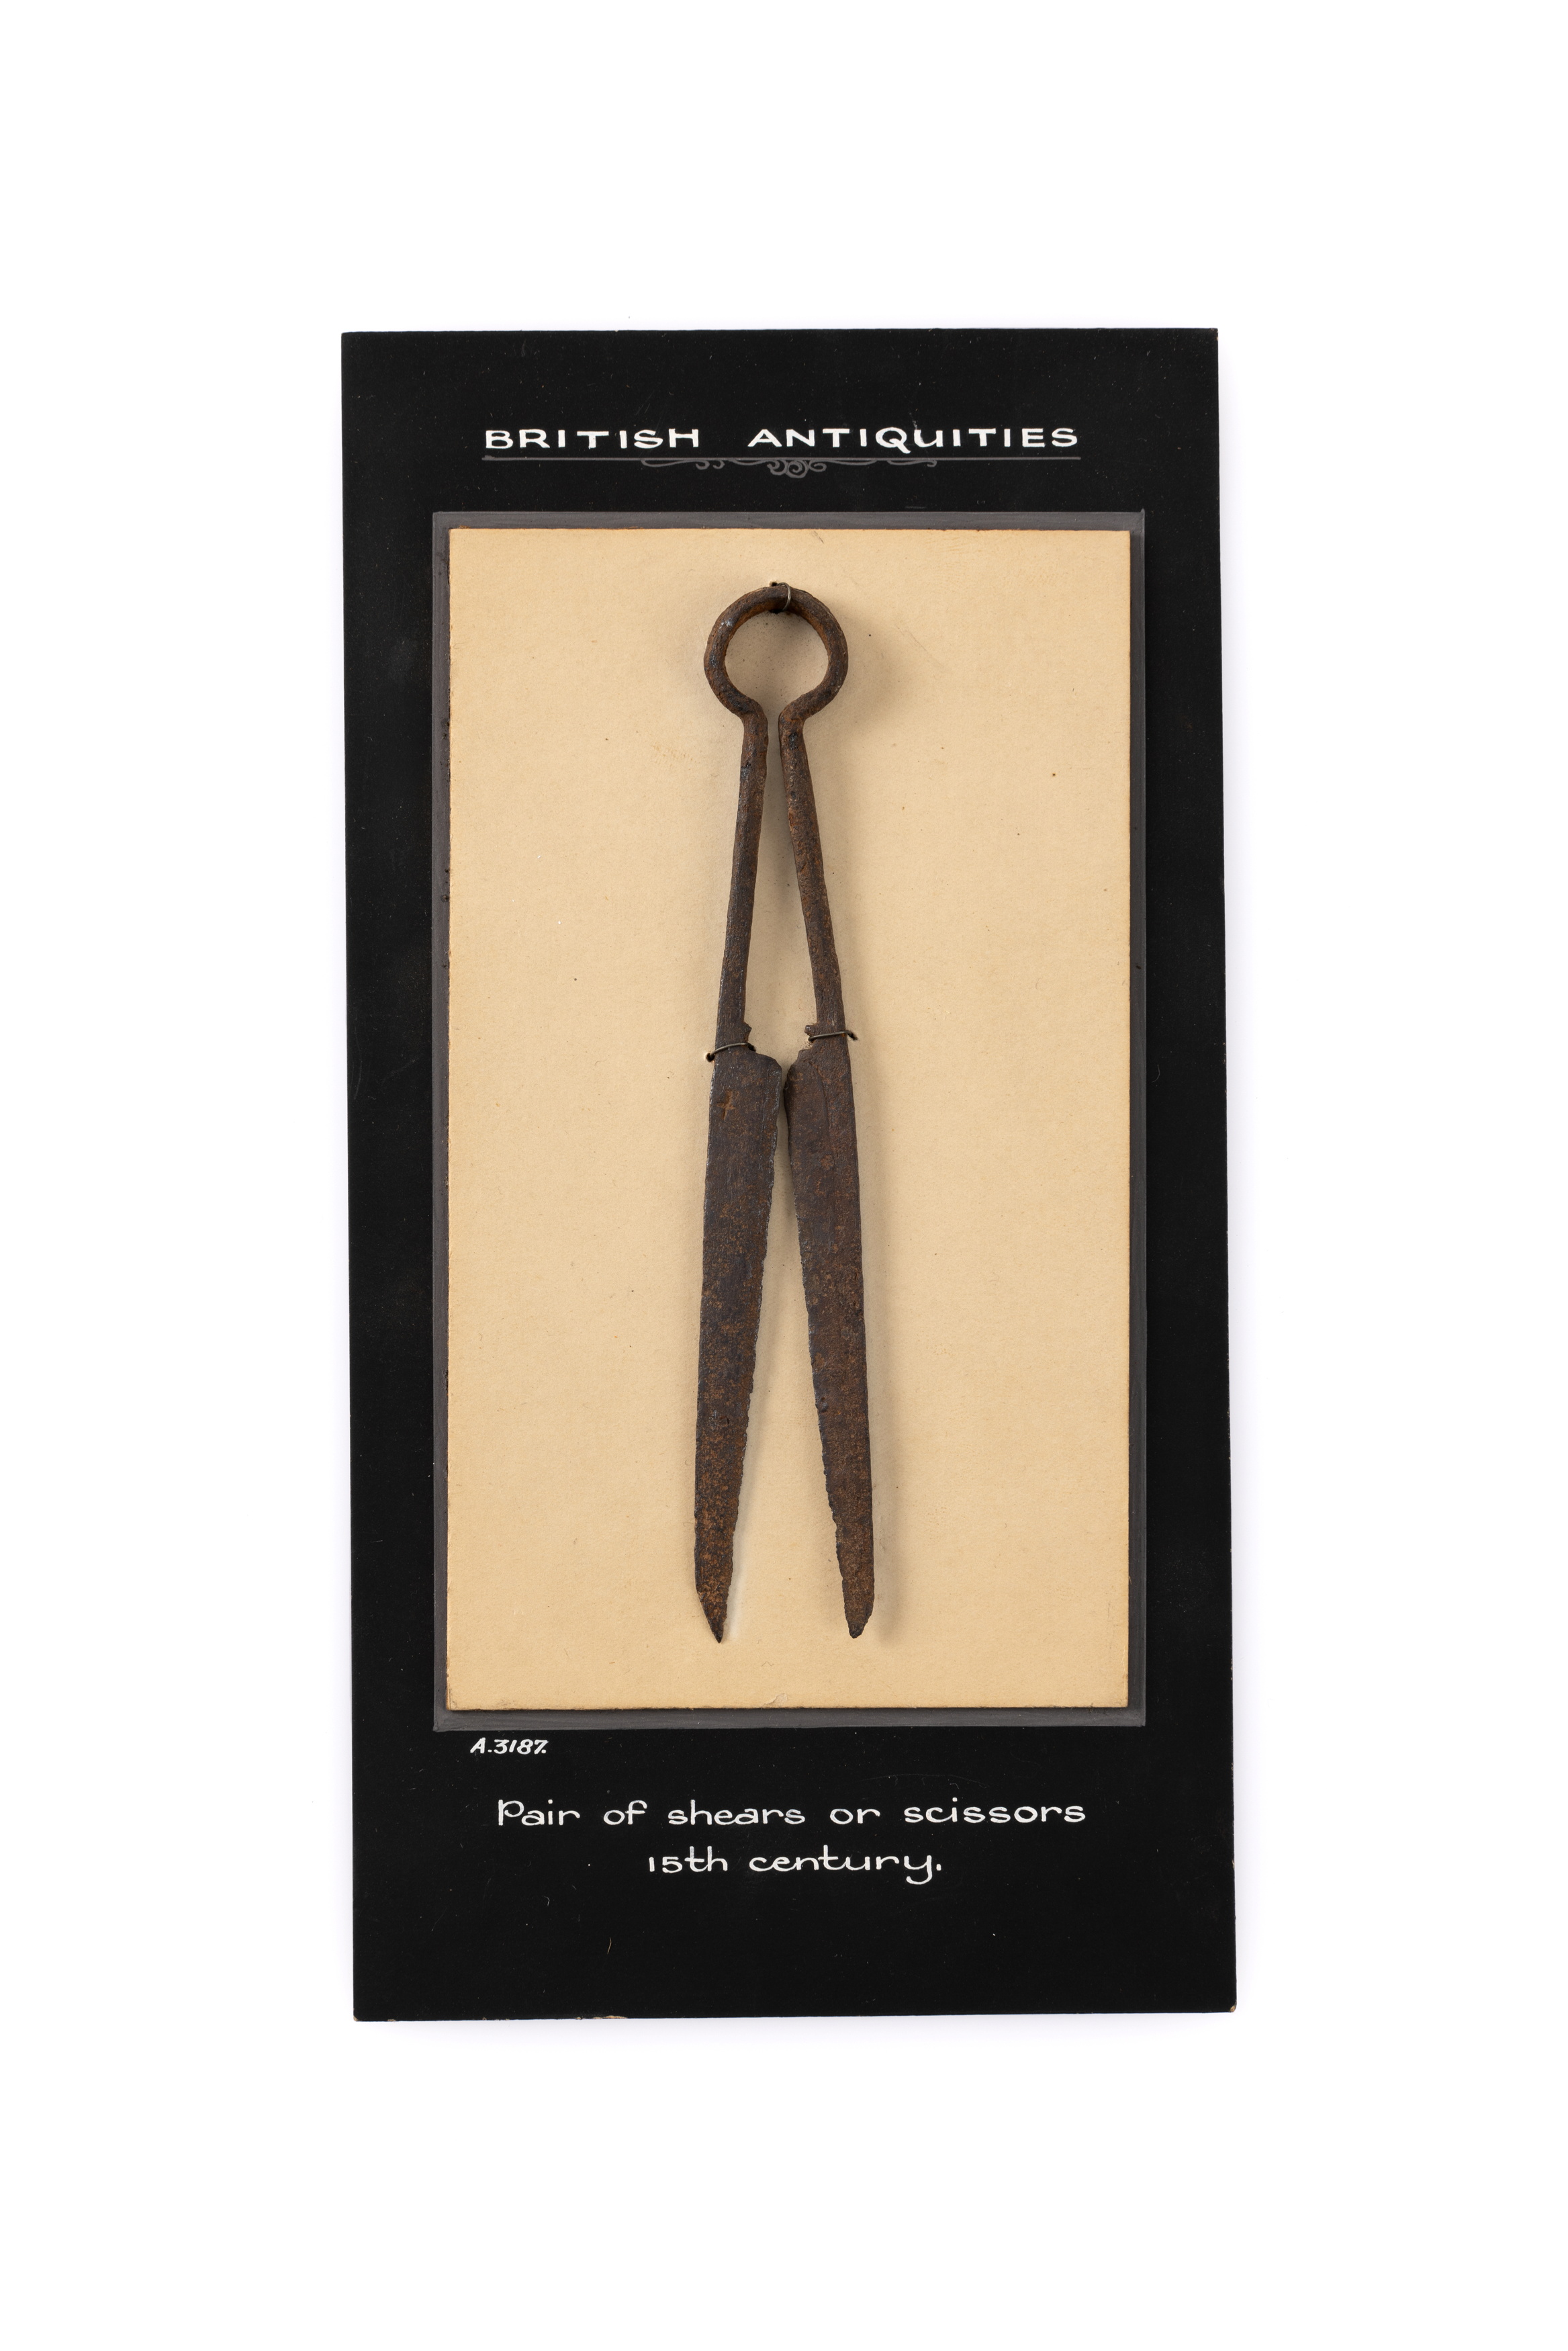 Pair of shears or scissors from collection of Romano-British antiquities